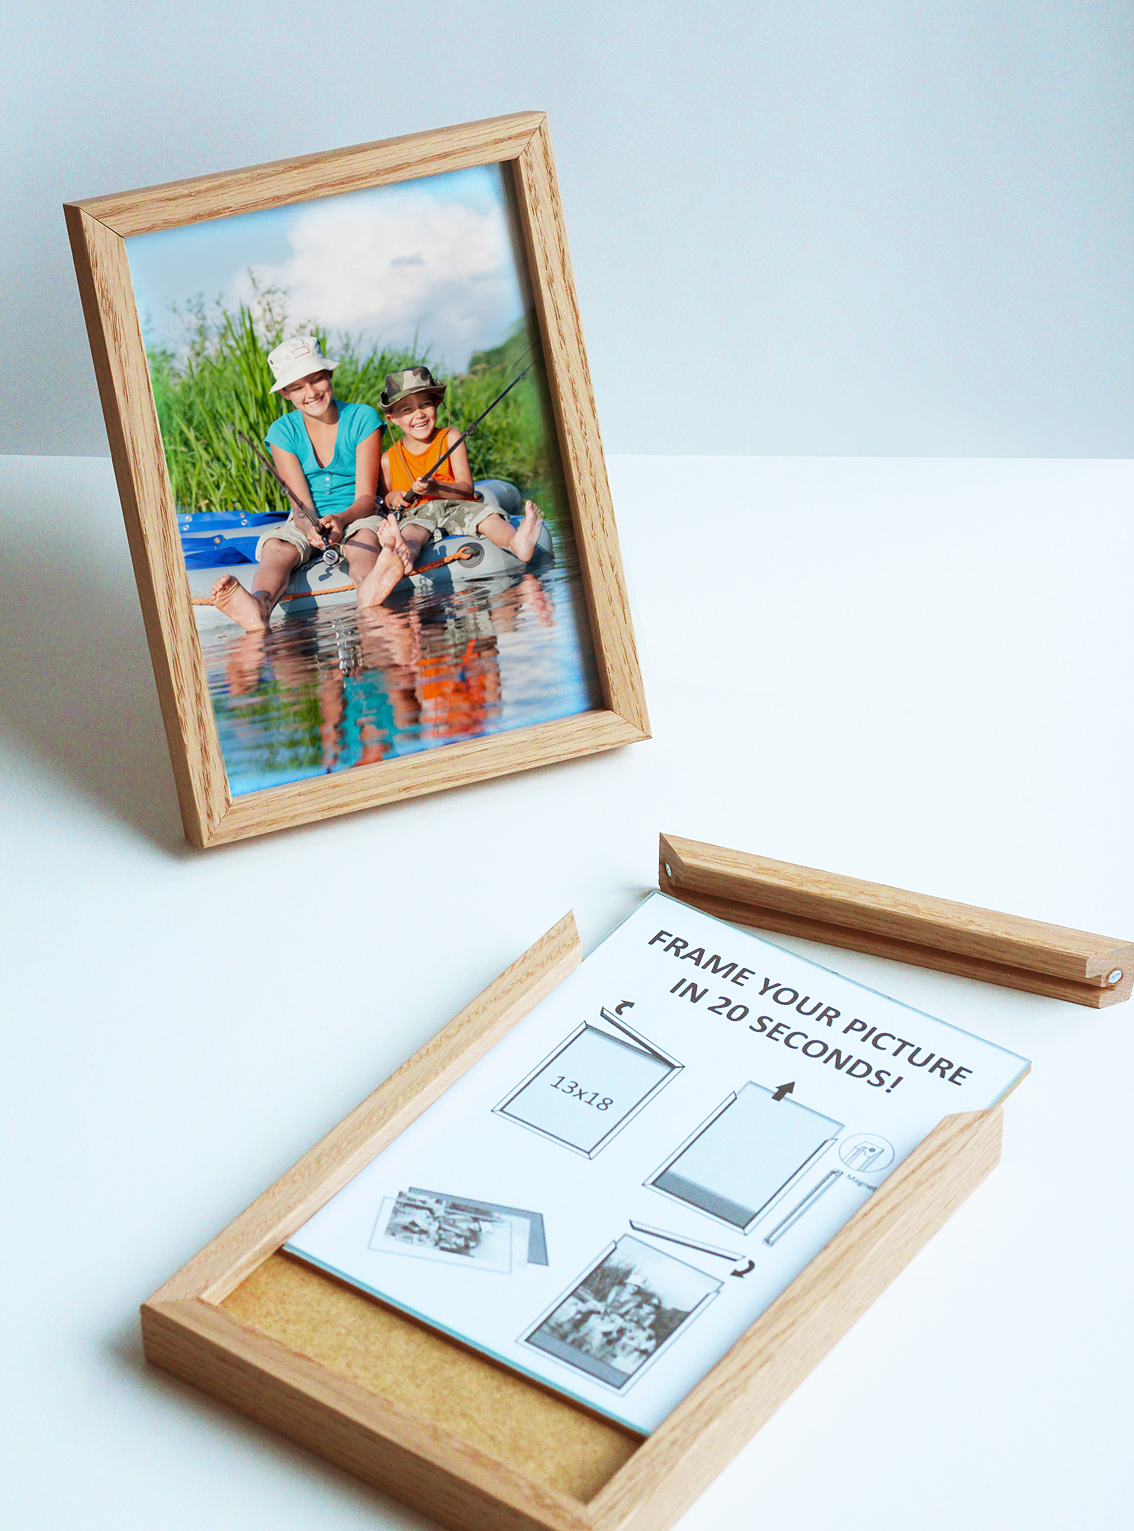 Oak wood magnetic frame with instruction marketing inlay, illustration of detaching the magnetic side of the frame and taking away the glass with sliding backside, tabletop magnetic frame with framed family portrait in the background. Produced by Debex Suisse.